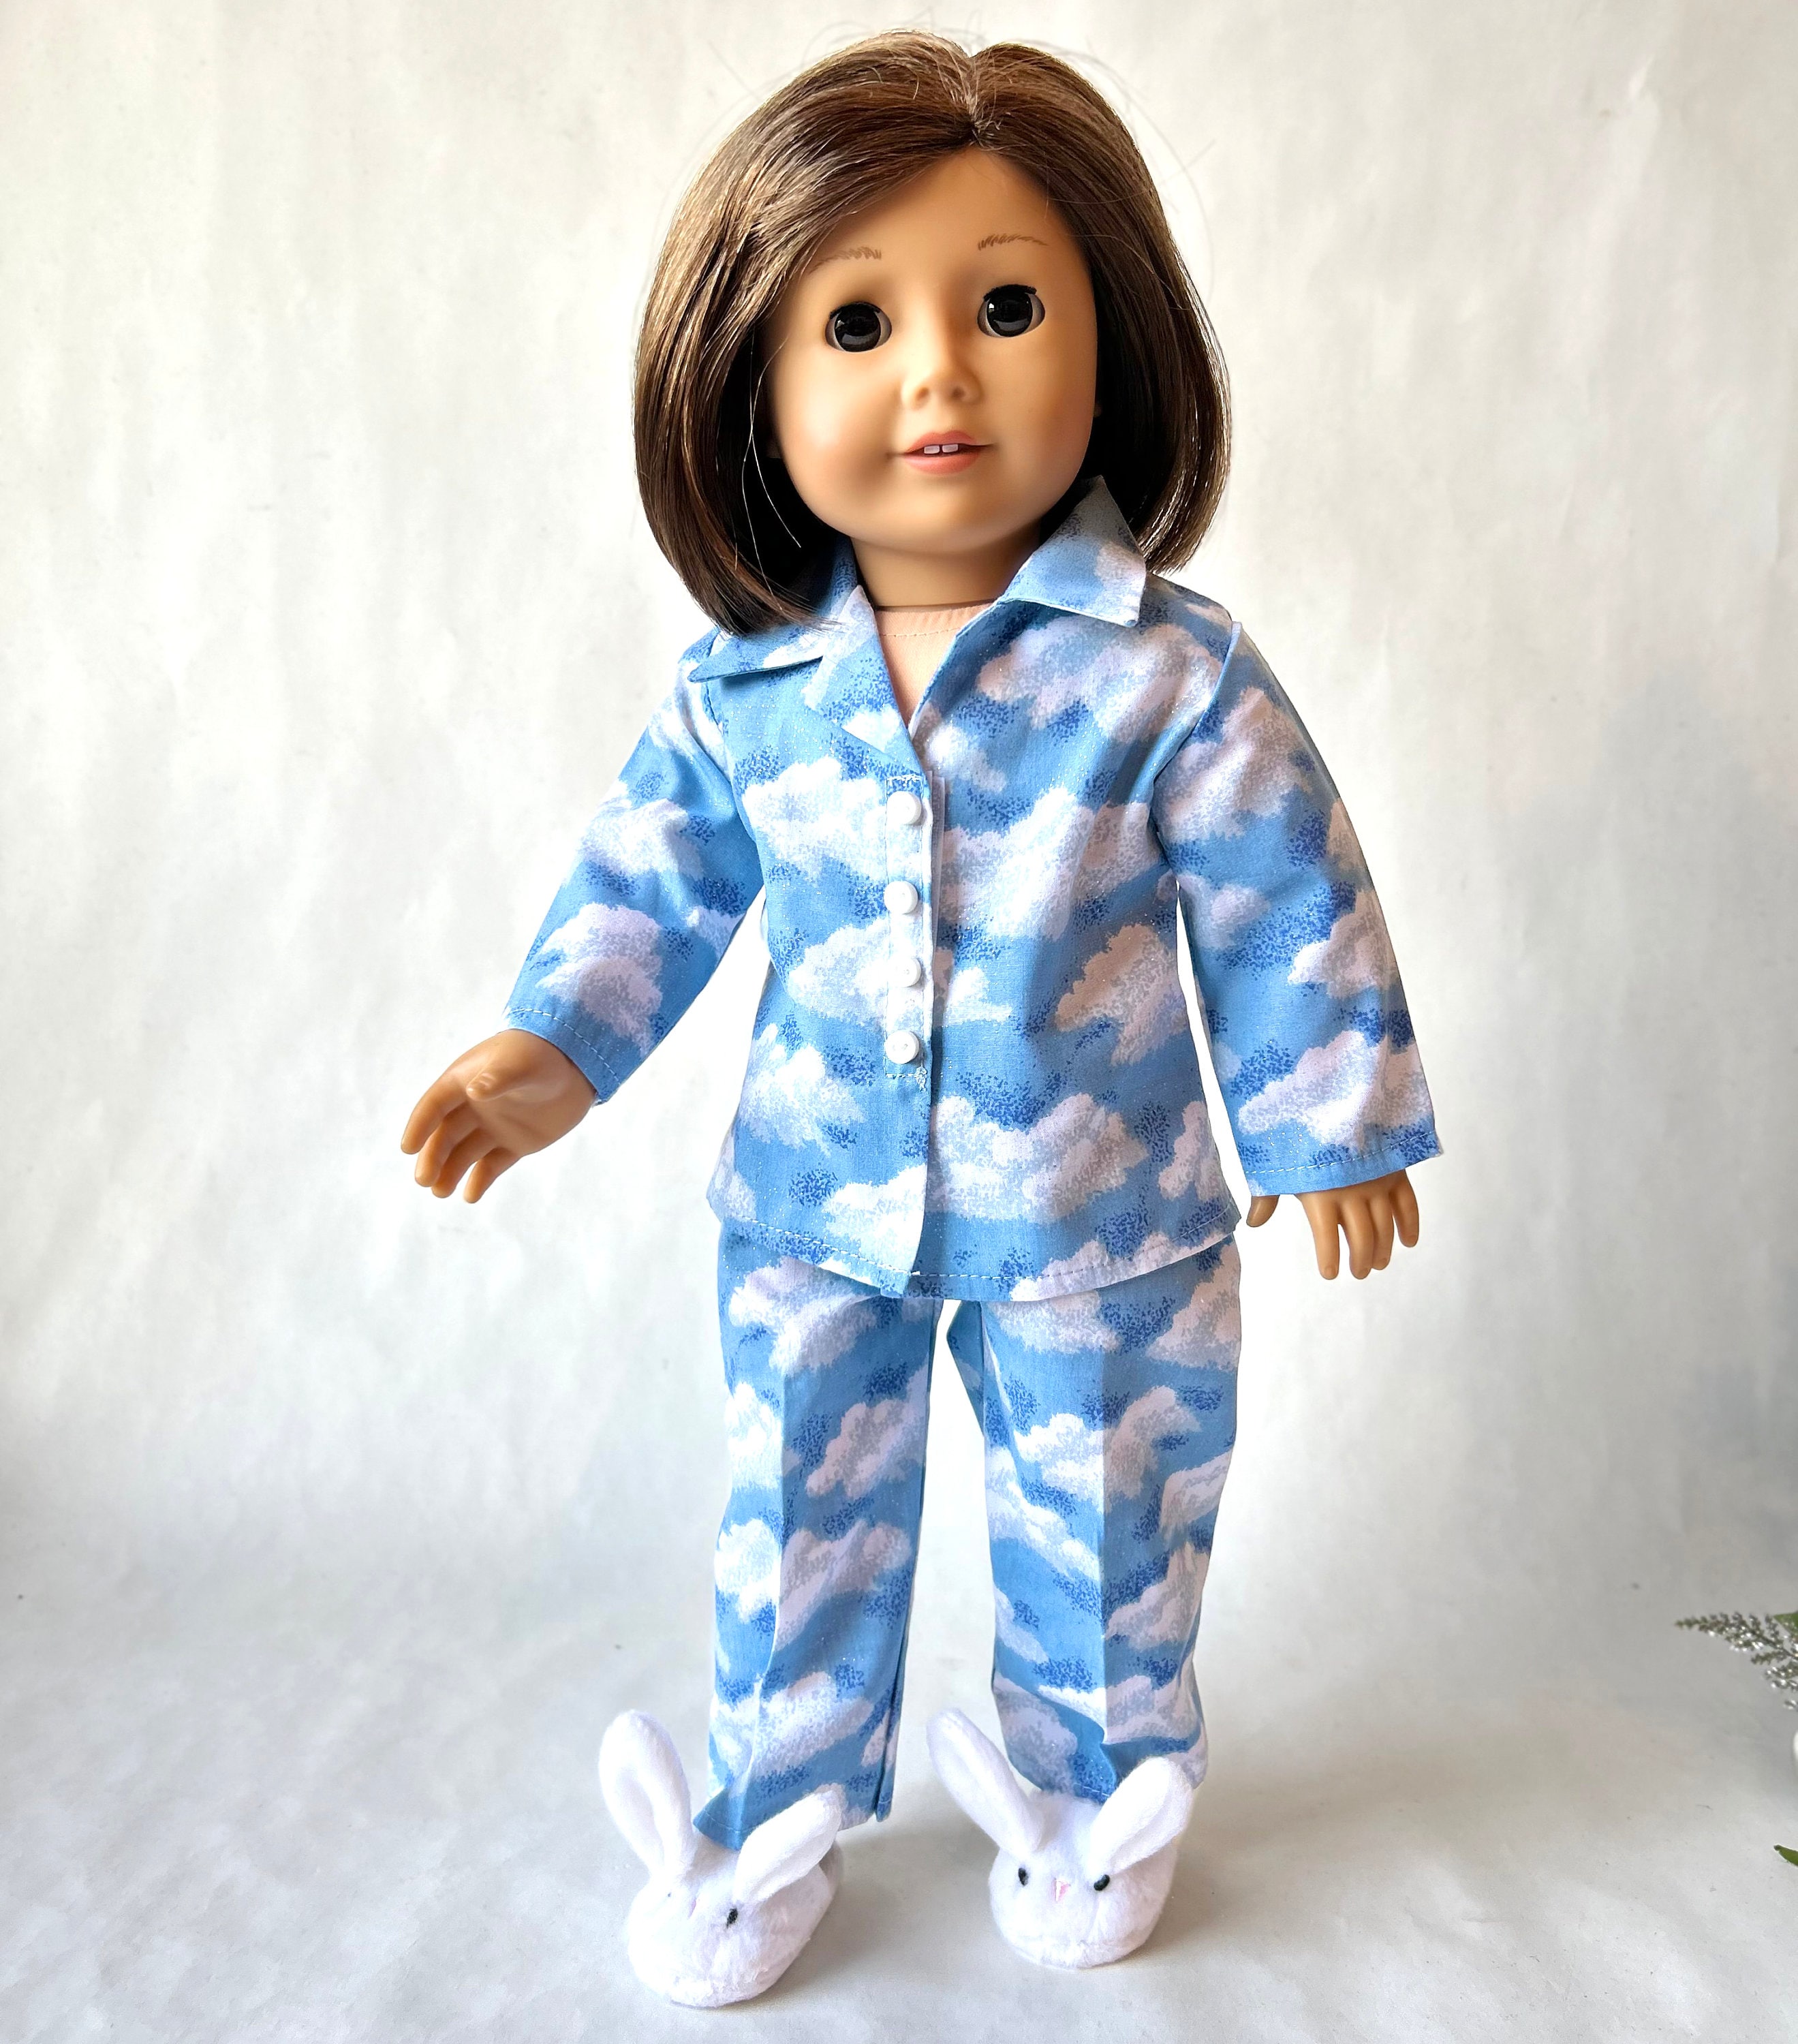 18 Doll Pajamas Blue Cloud With Glitter Cotton Fabric & White